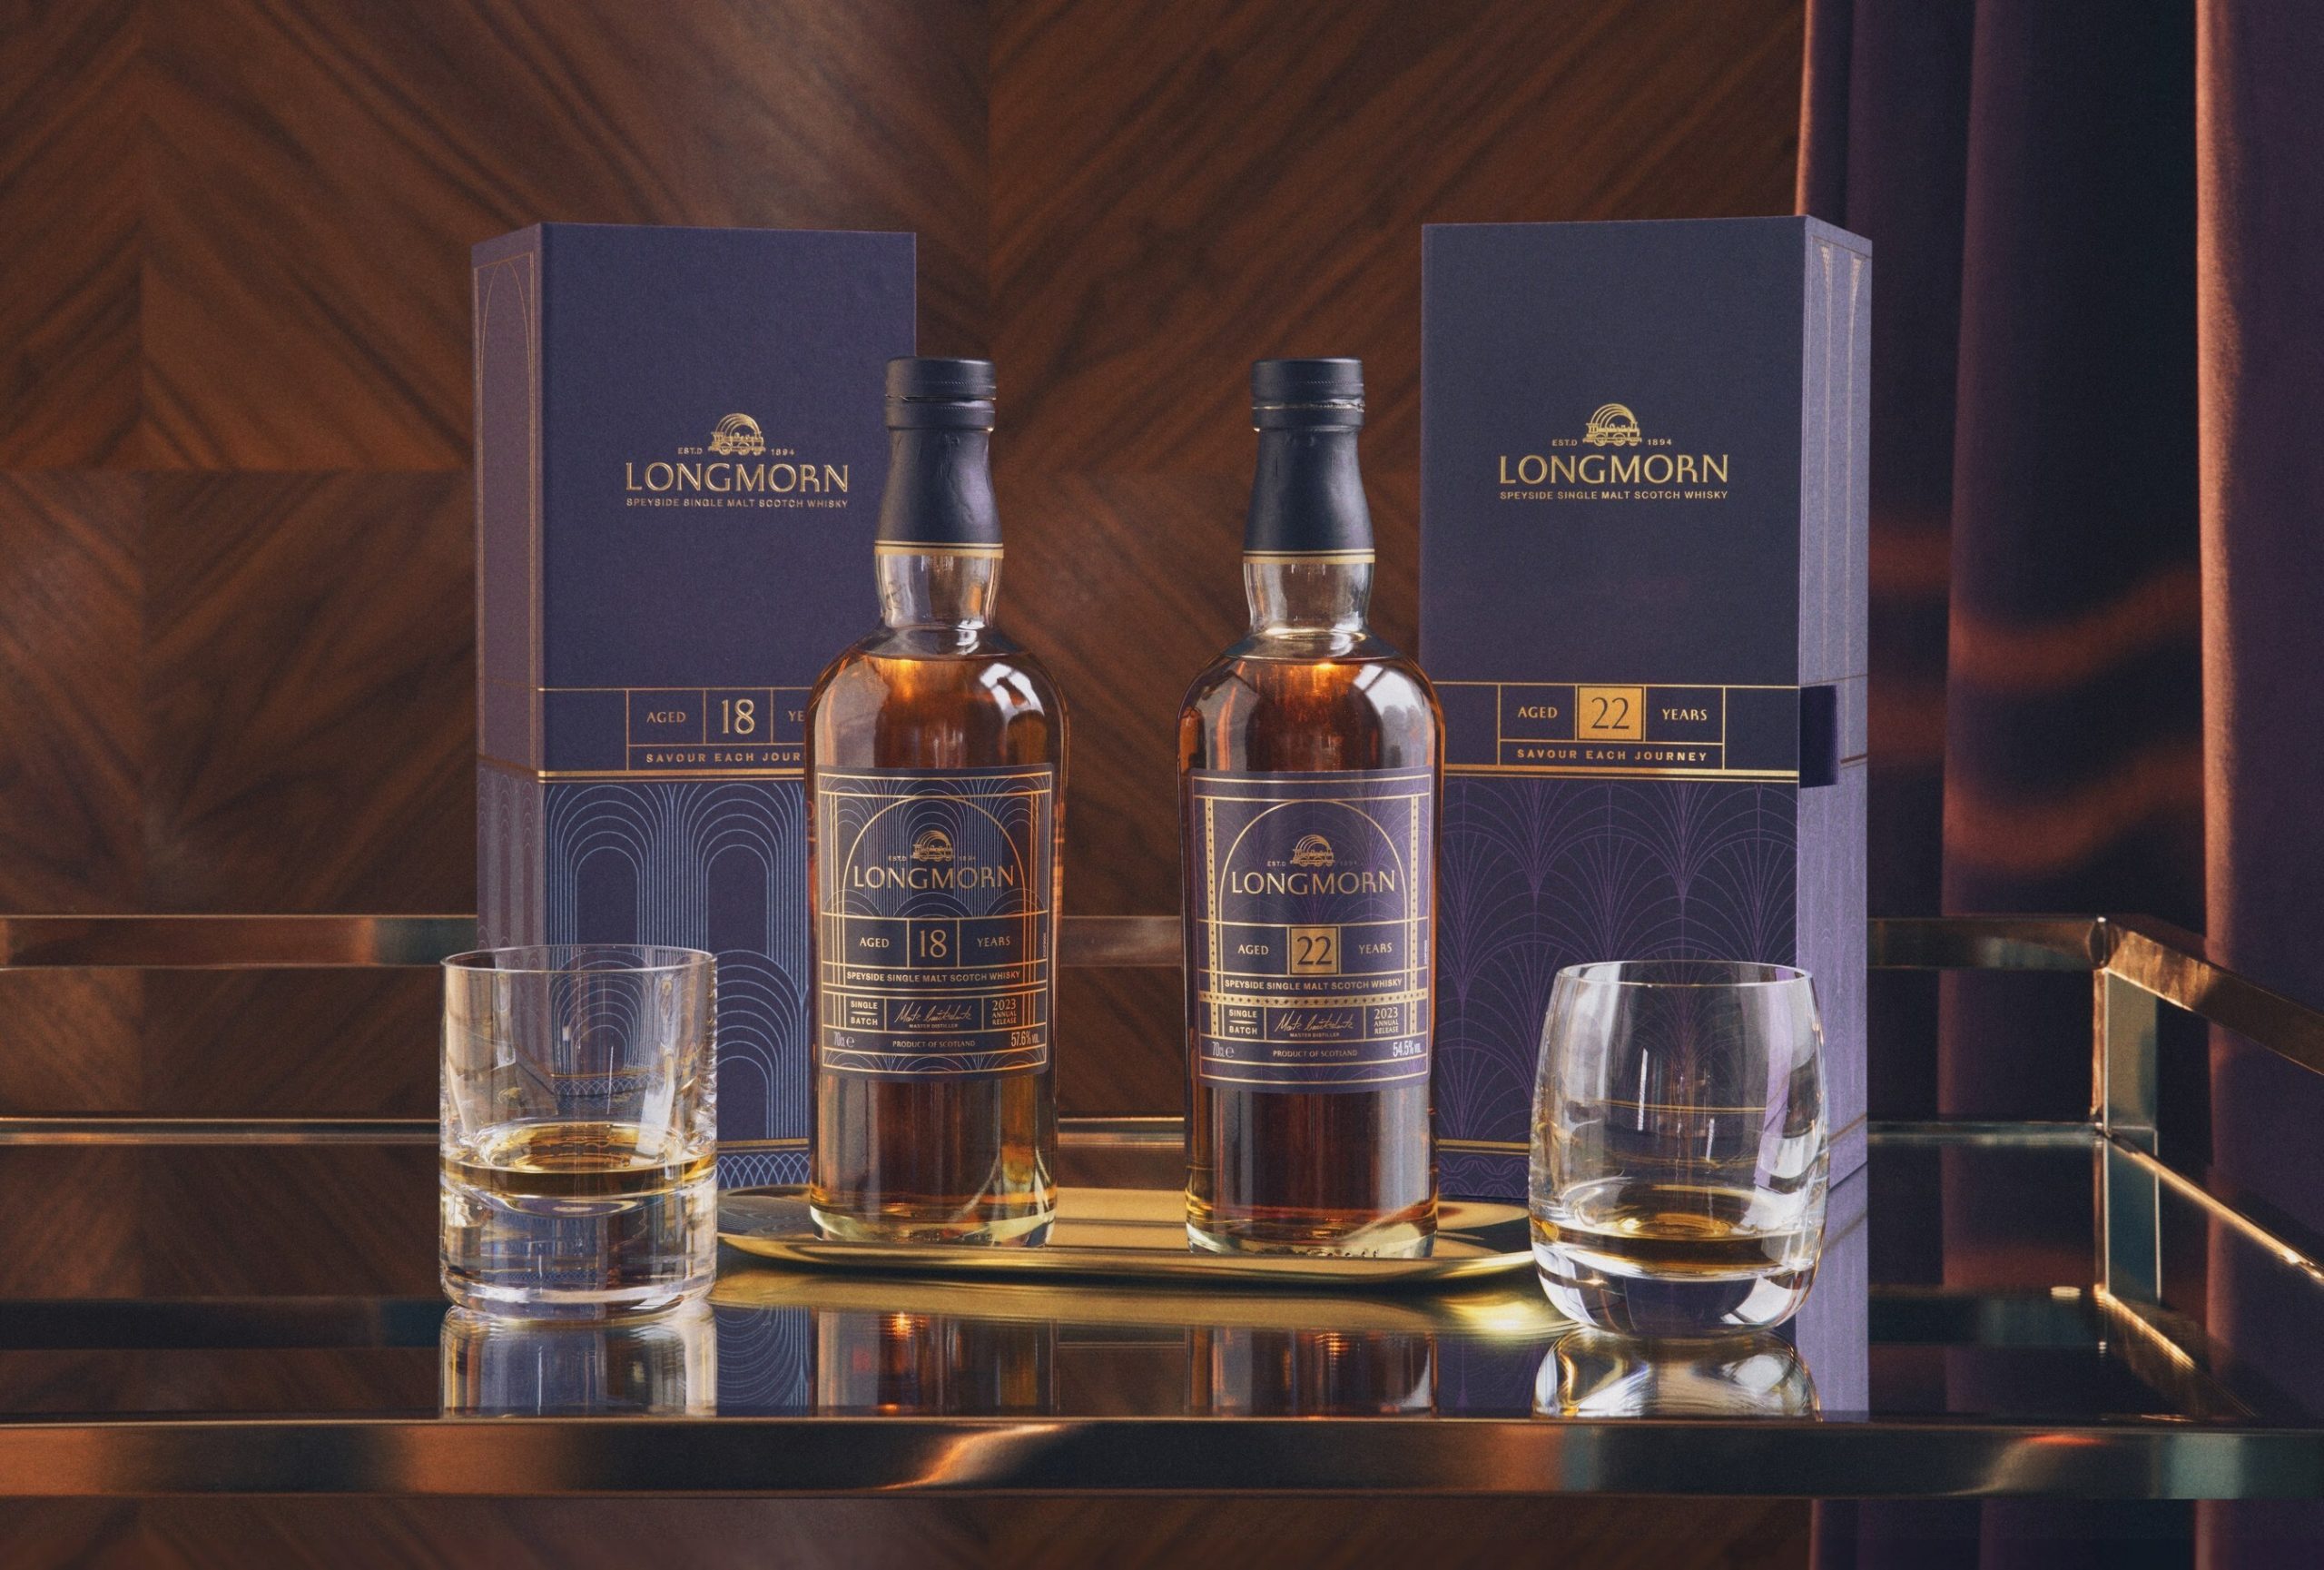 Longmorn single malt whisky launches two new expressions